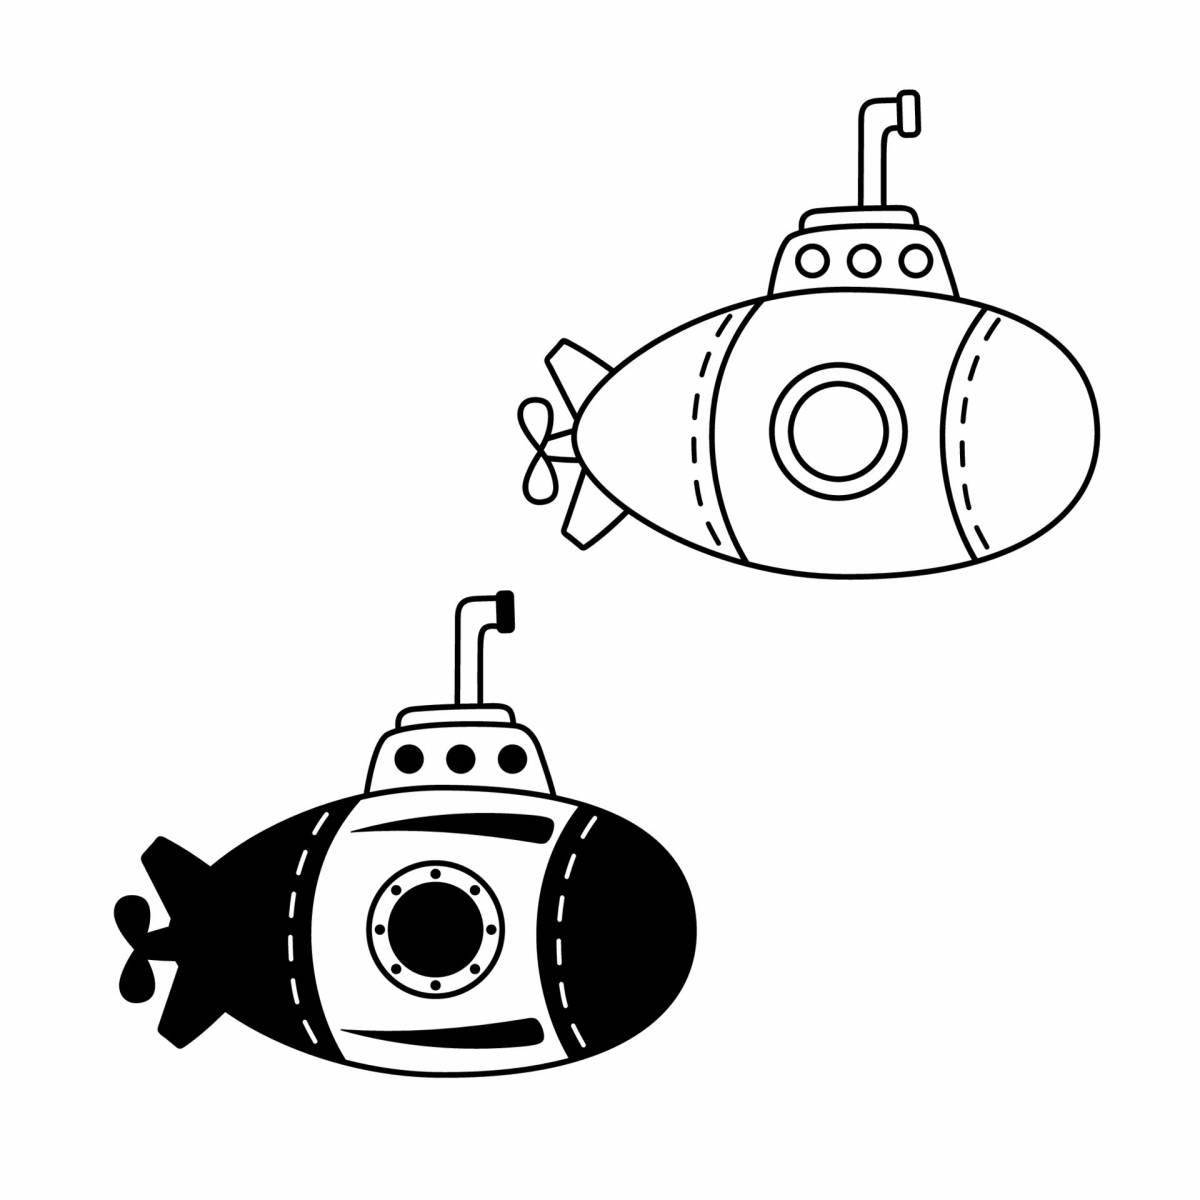 Colorful bathyscaphe coloring page